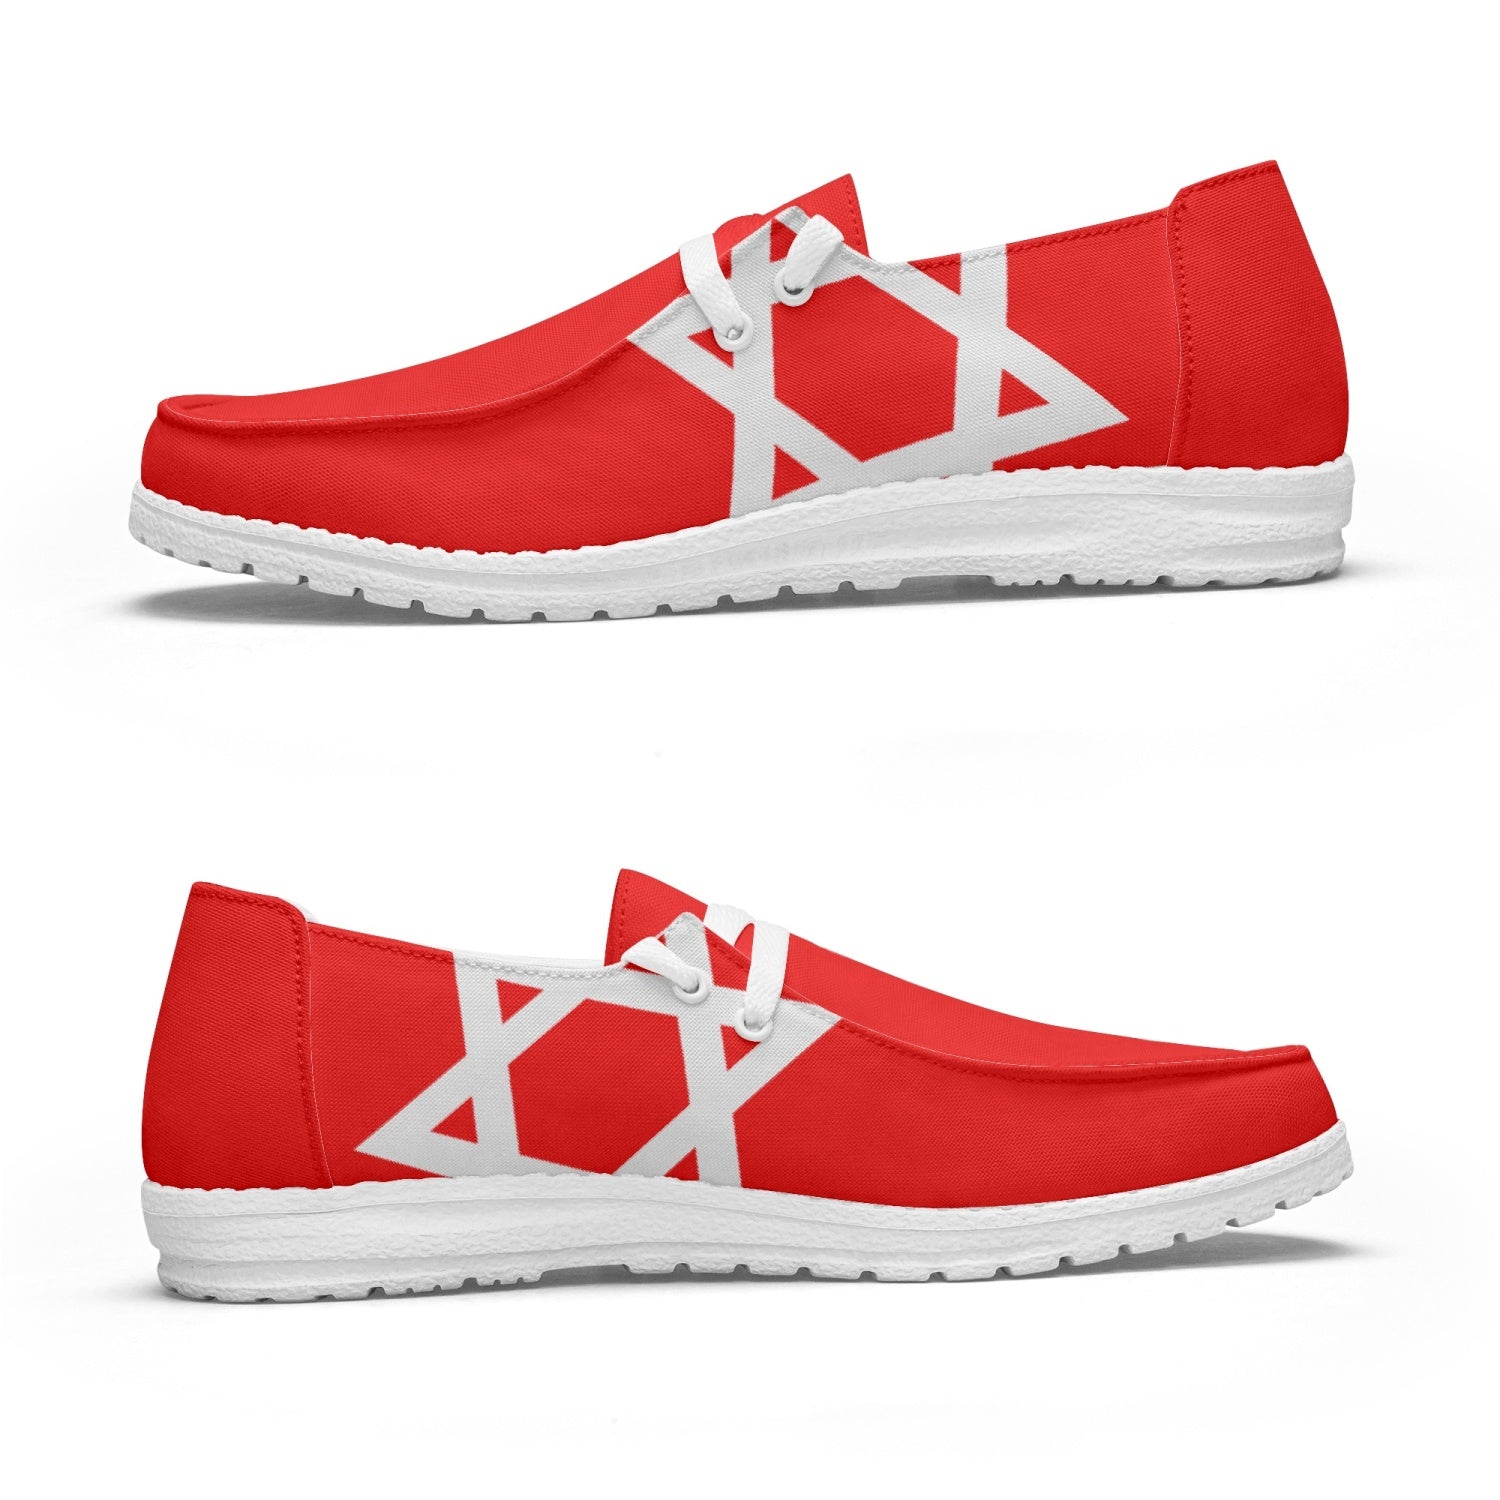 Red Star of David Canvas Lace-up Loafers pair one above the other